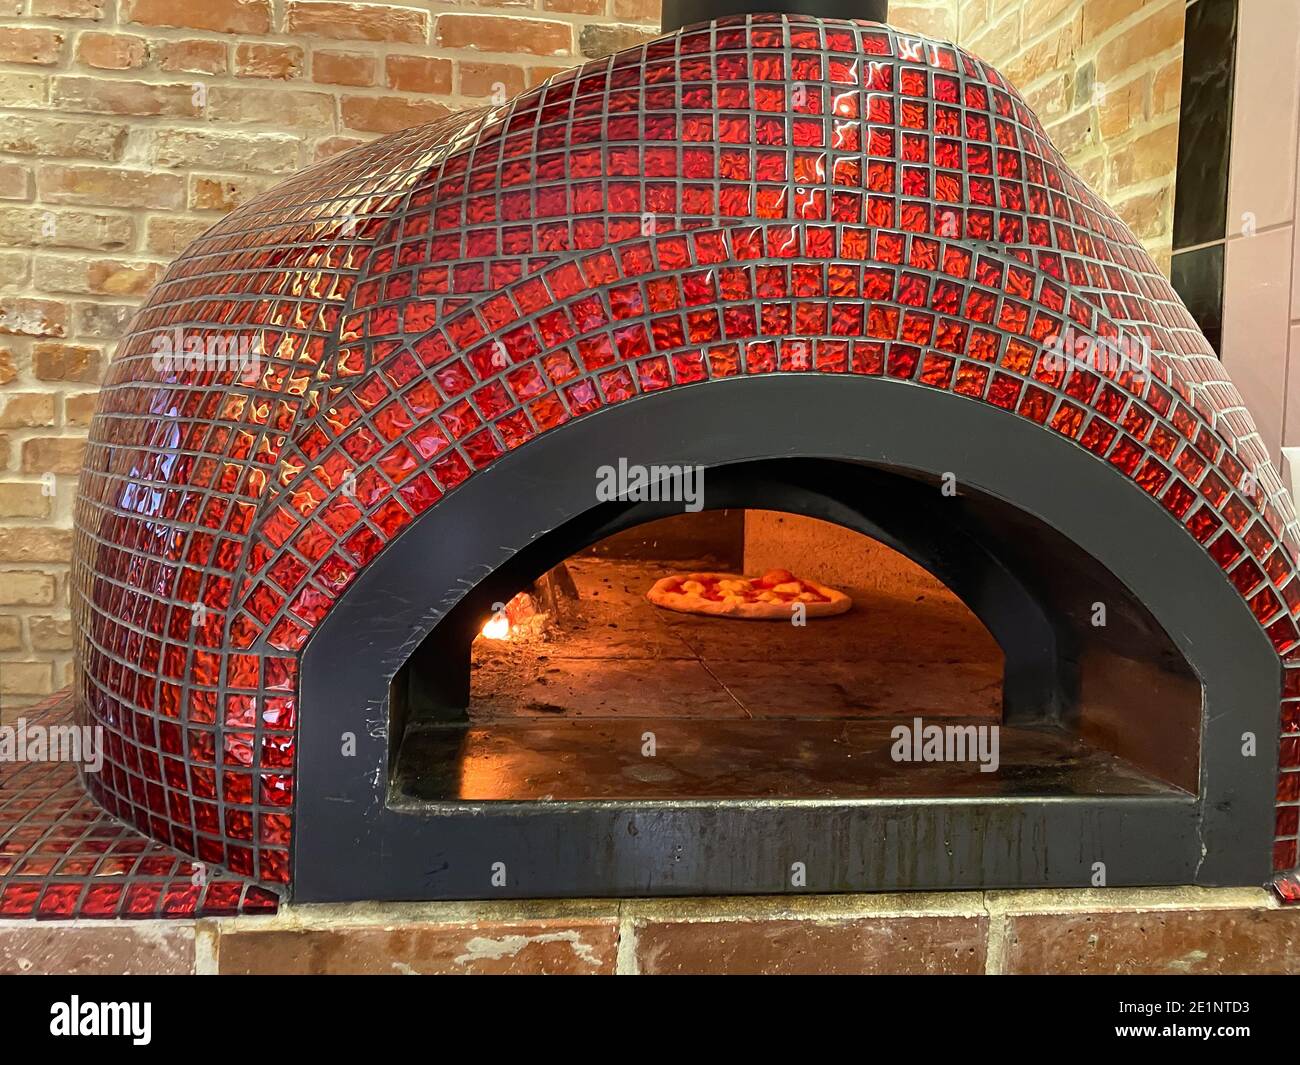 Baking oven, fireplace in the middle next to rising dough pizza, Italian traditional dish Stock Photo